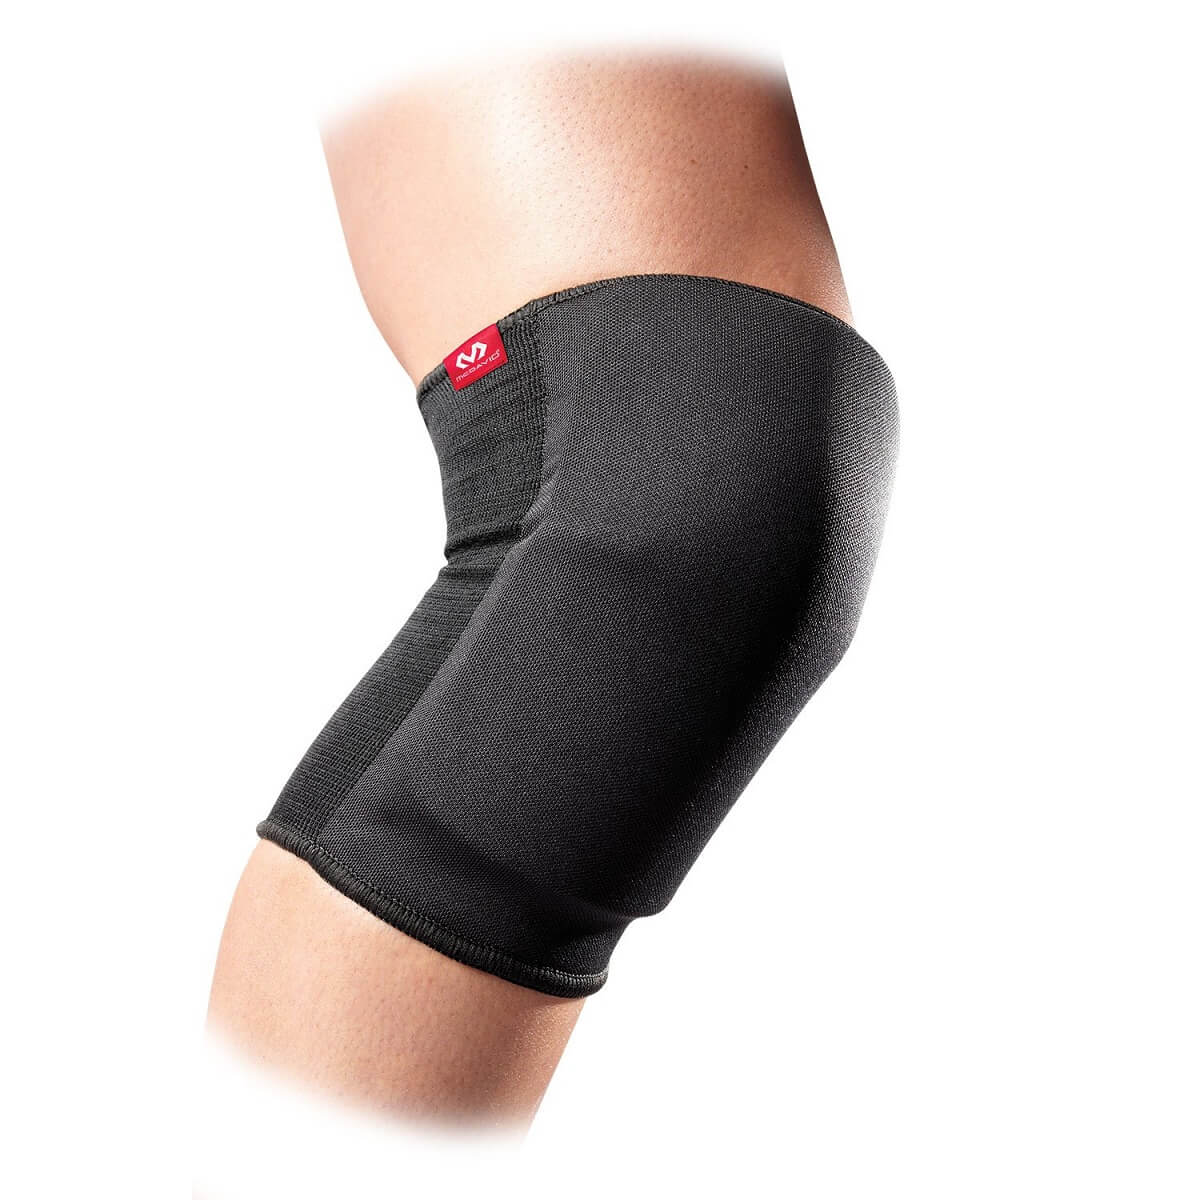 Q.LAEN 3 in 1 Durable Knee Pads Elbow Pads with India